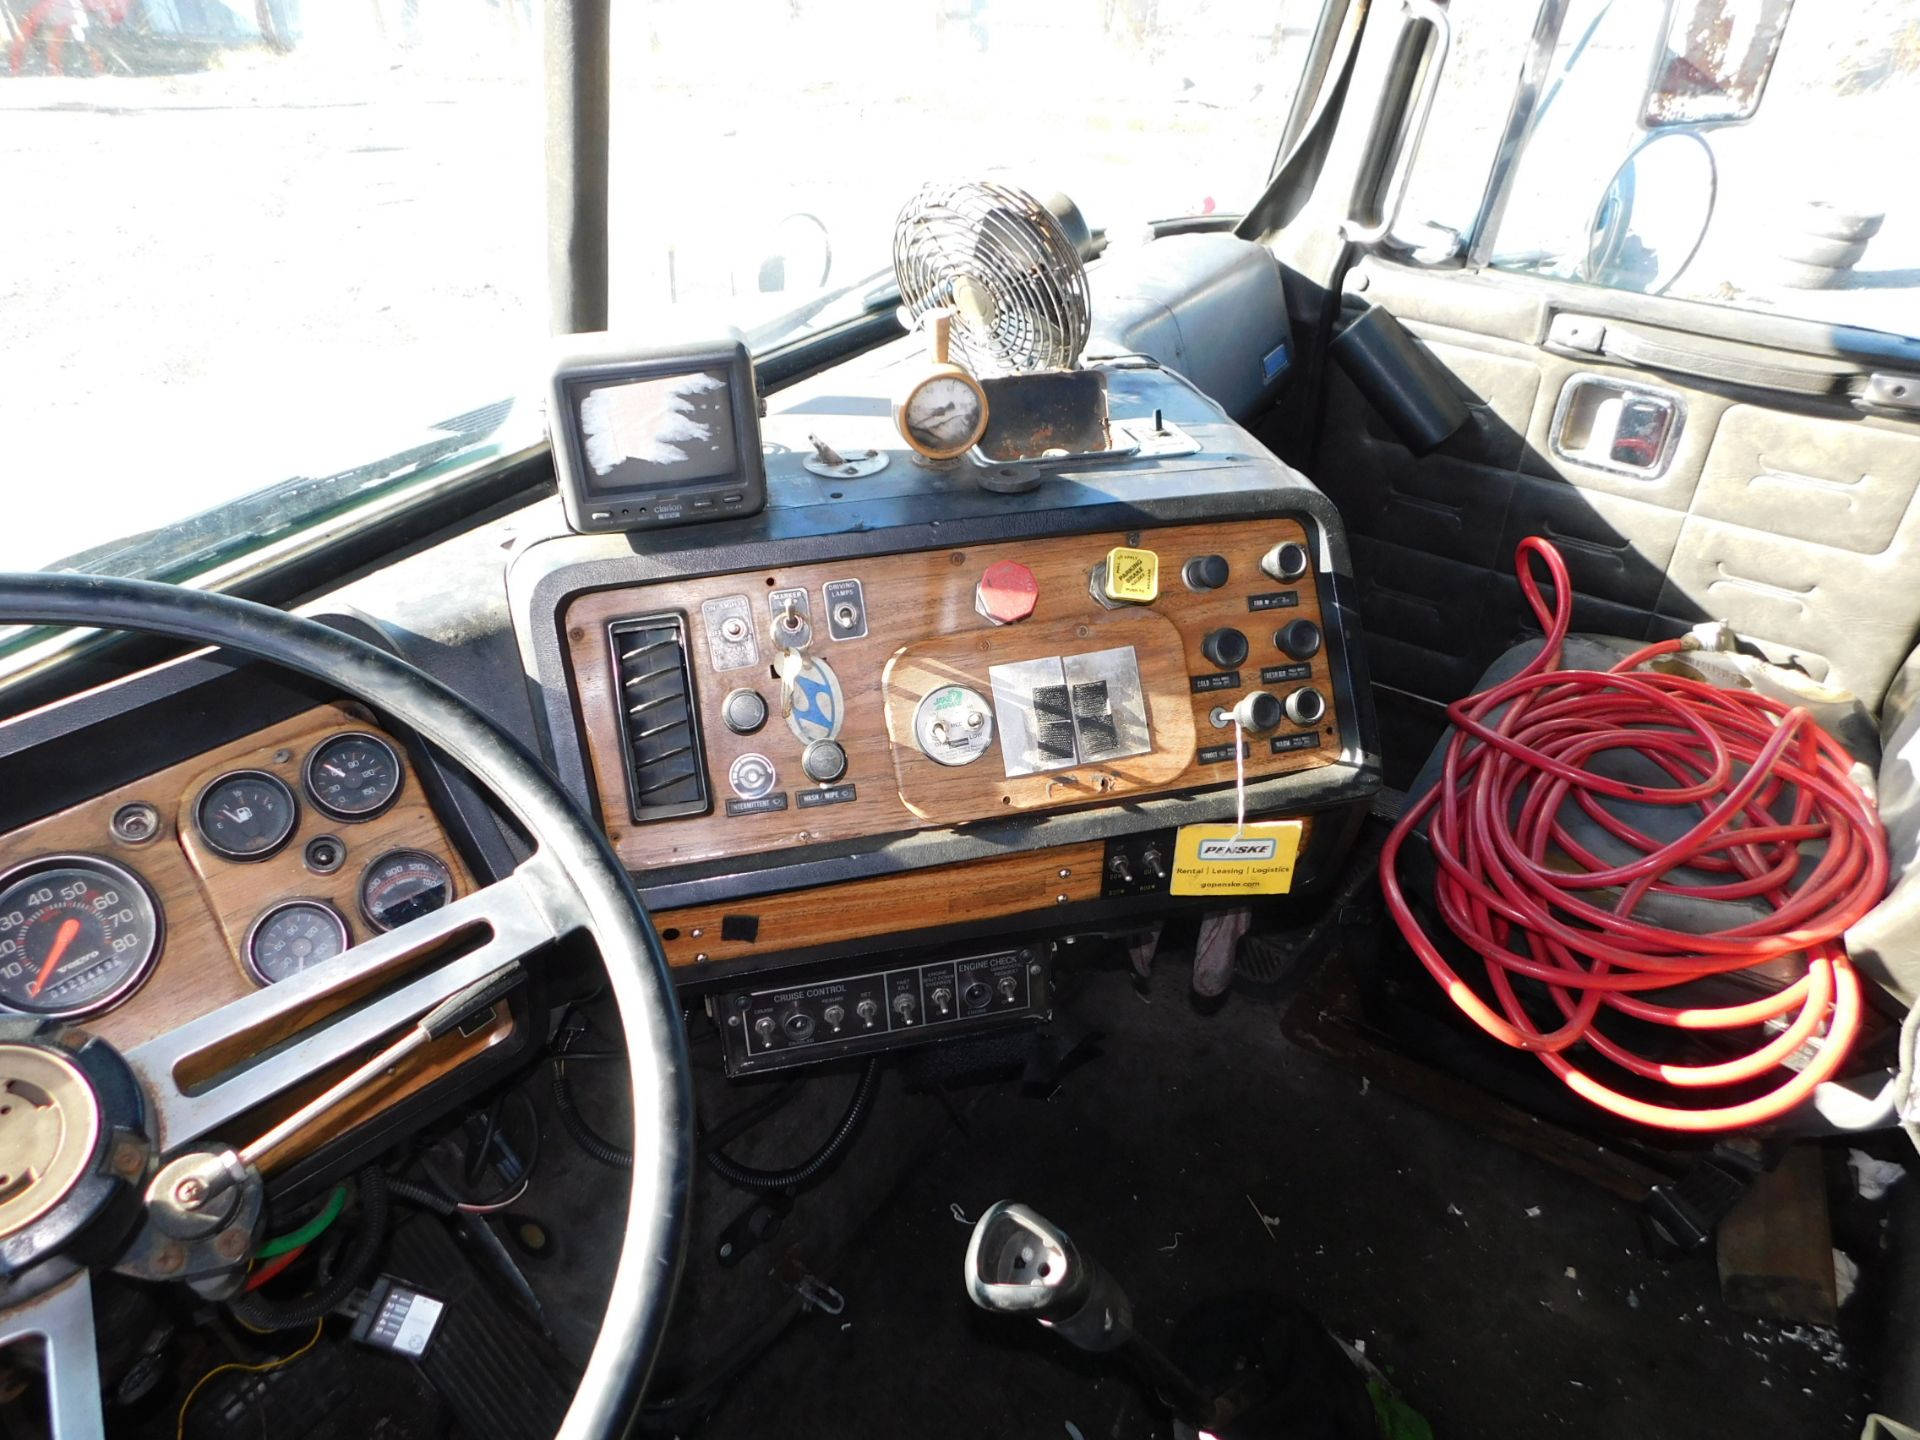 1989 WHITE Volvo GMC Aero Series 60 Heavy Duty Tow Truck, 329,000 miles showing on Odometer, Detroit - Image 22 of 28